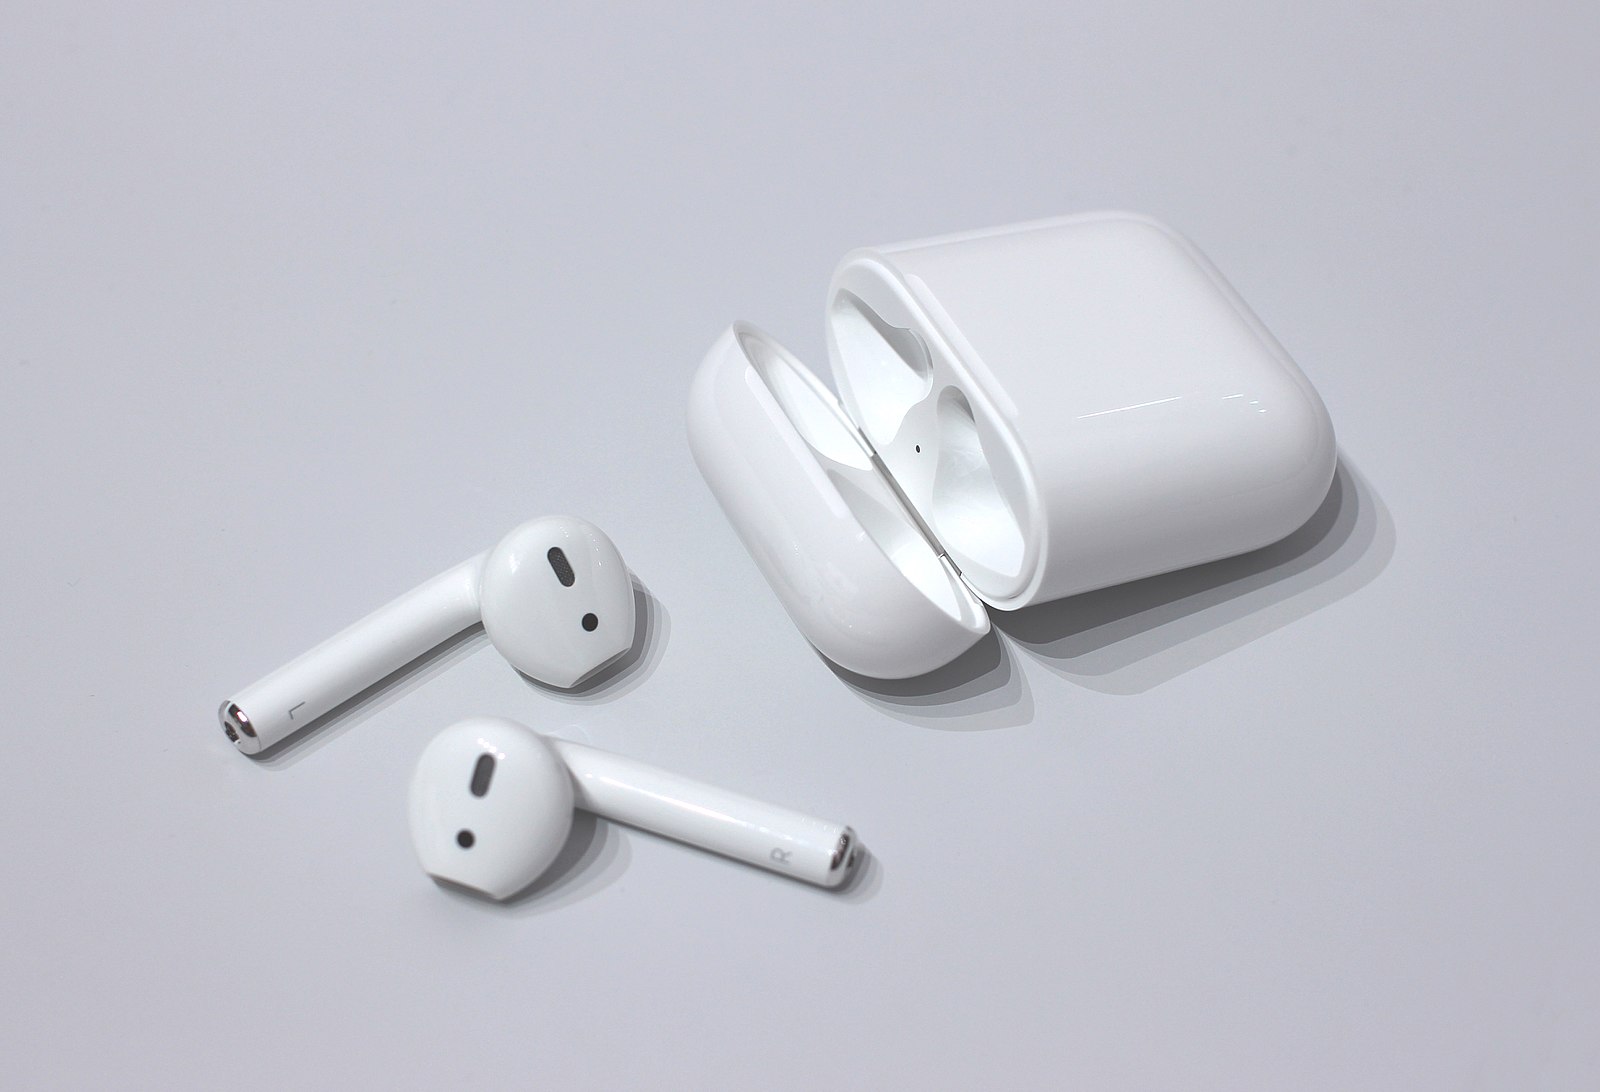 Difference Between AirPods 1 and AirPods 2